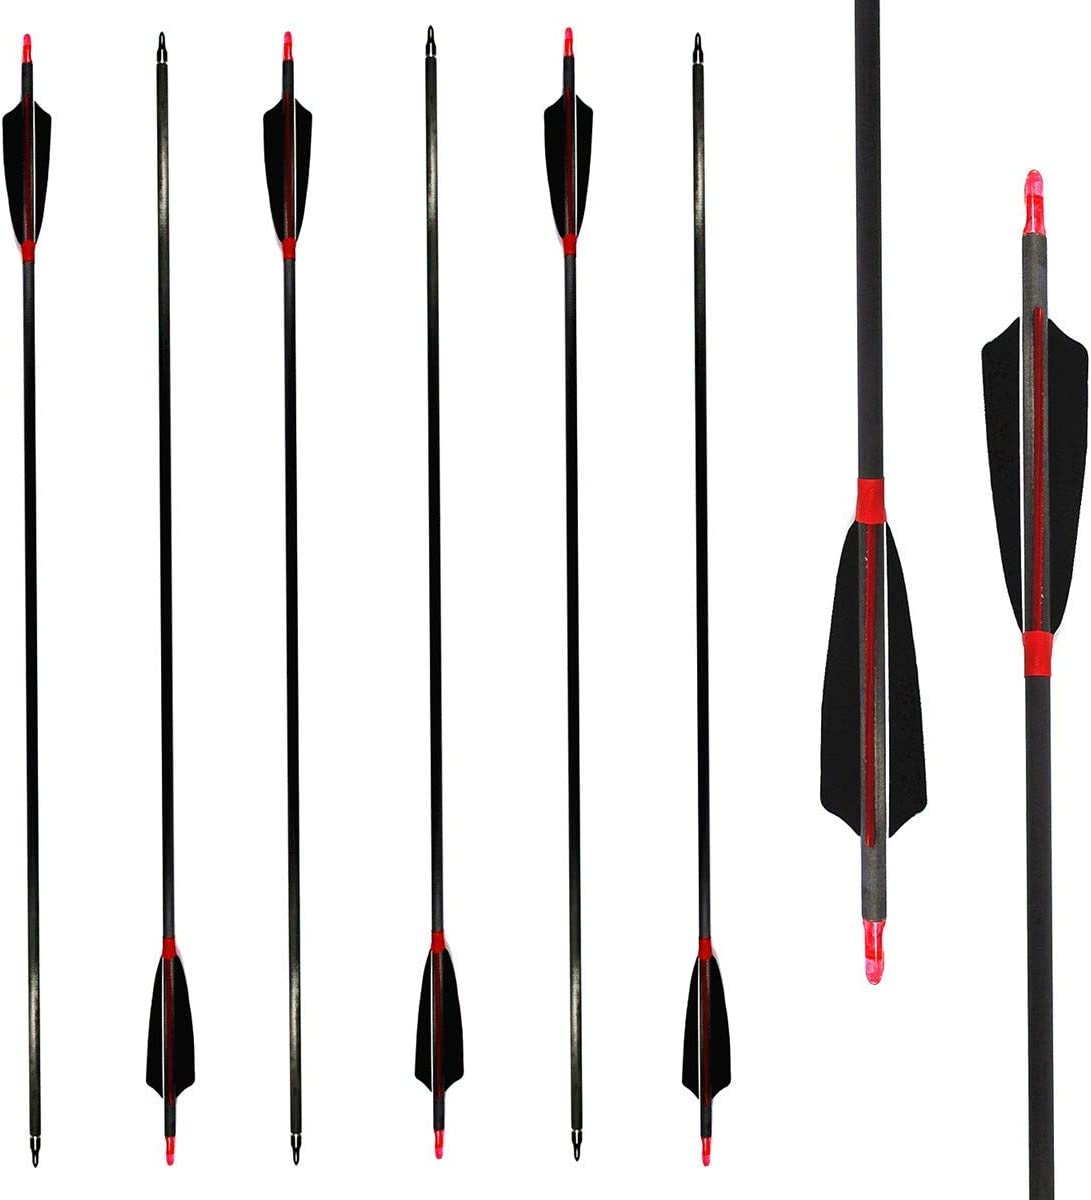 Carbon Archery Arrows 500 Spine with Real Feathers for Compound Recurve Bow (12 Pack)